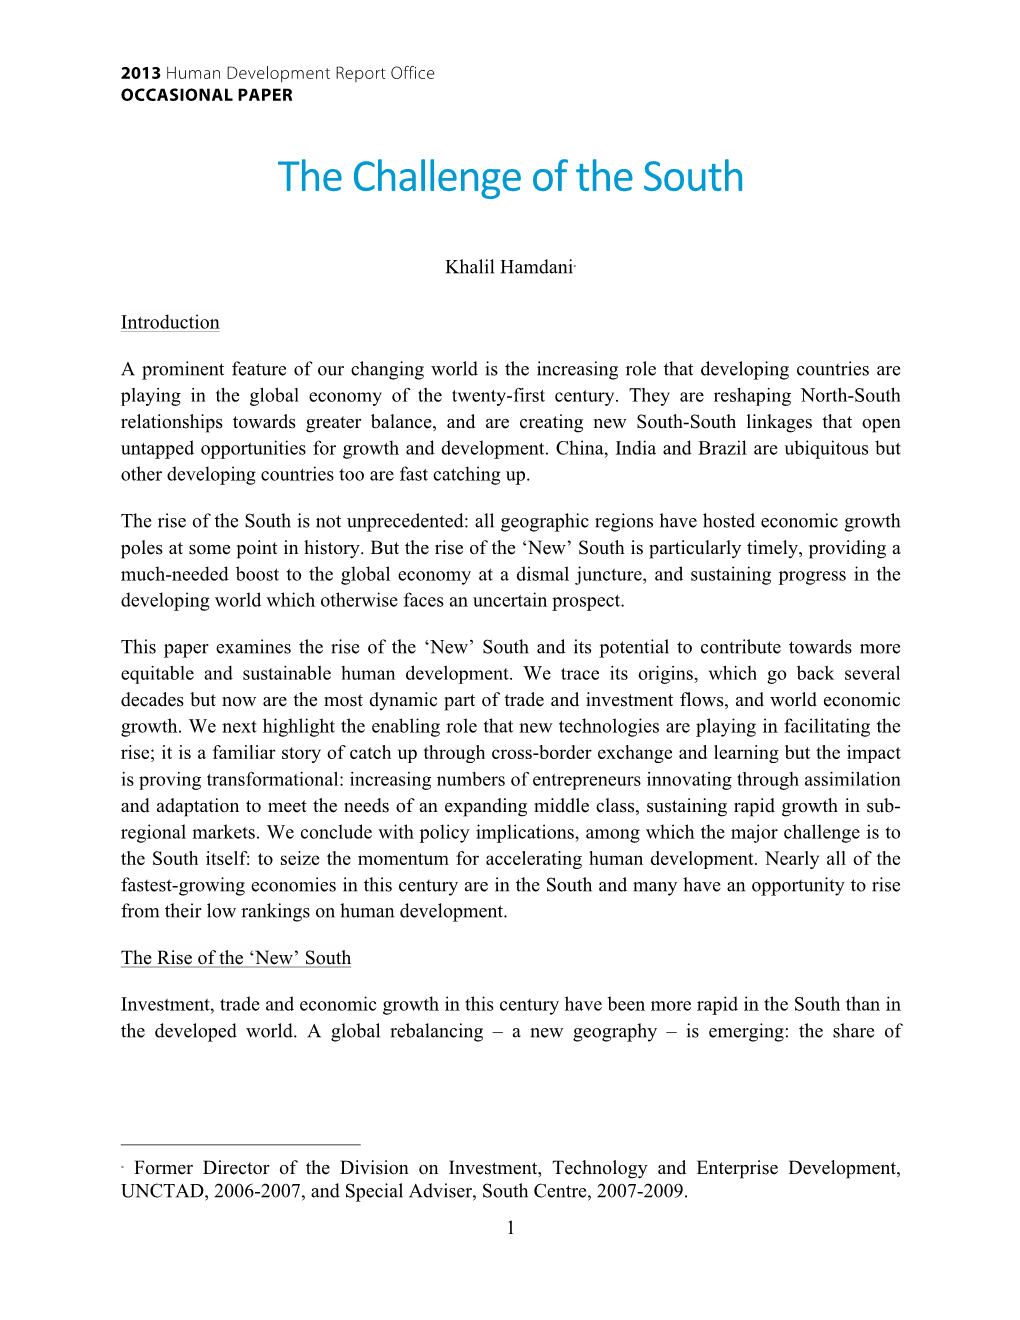 The Challenge of the South